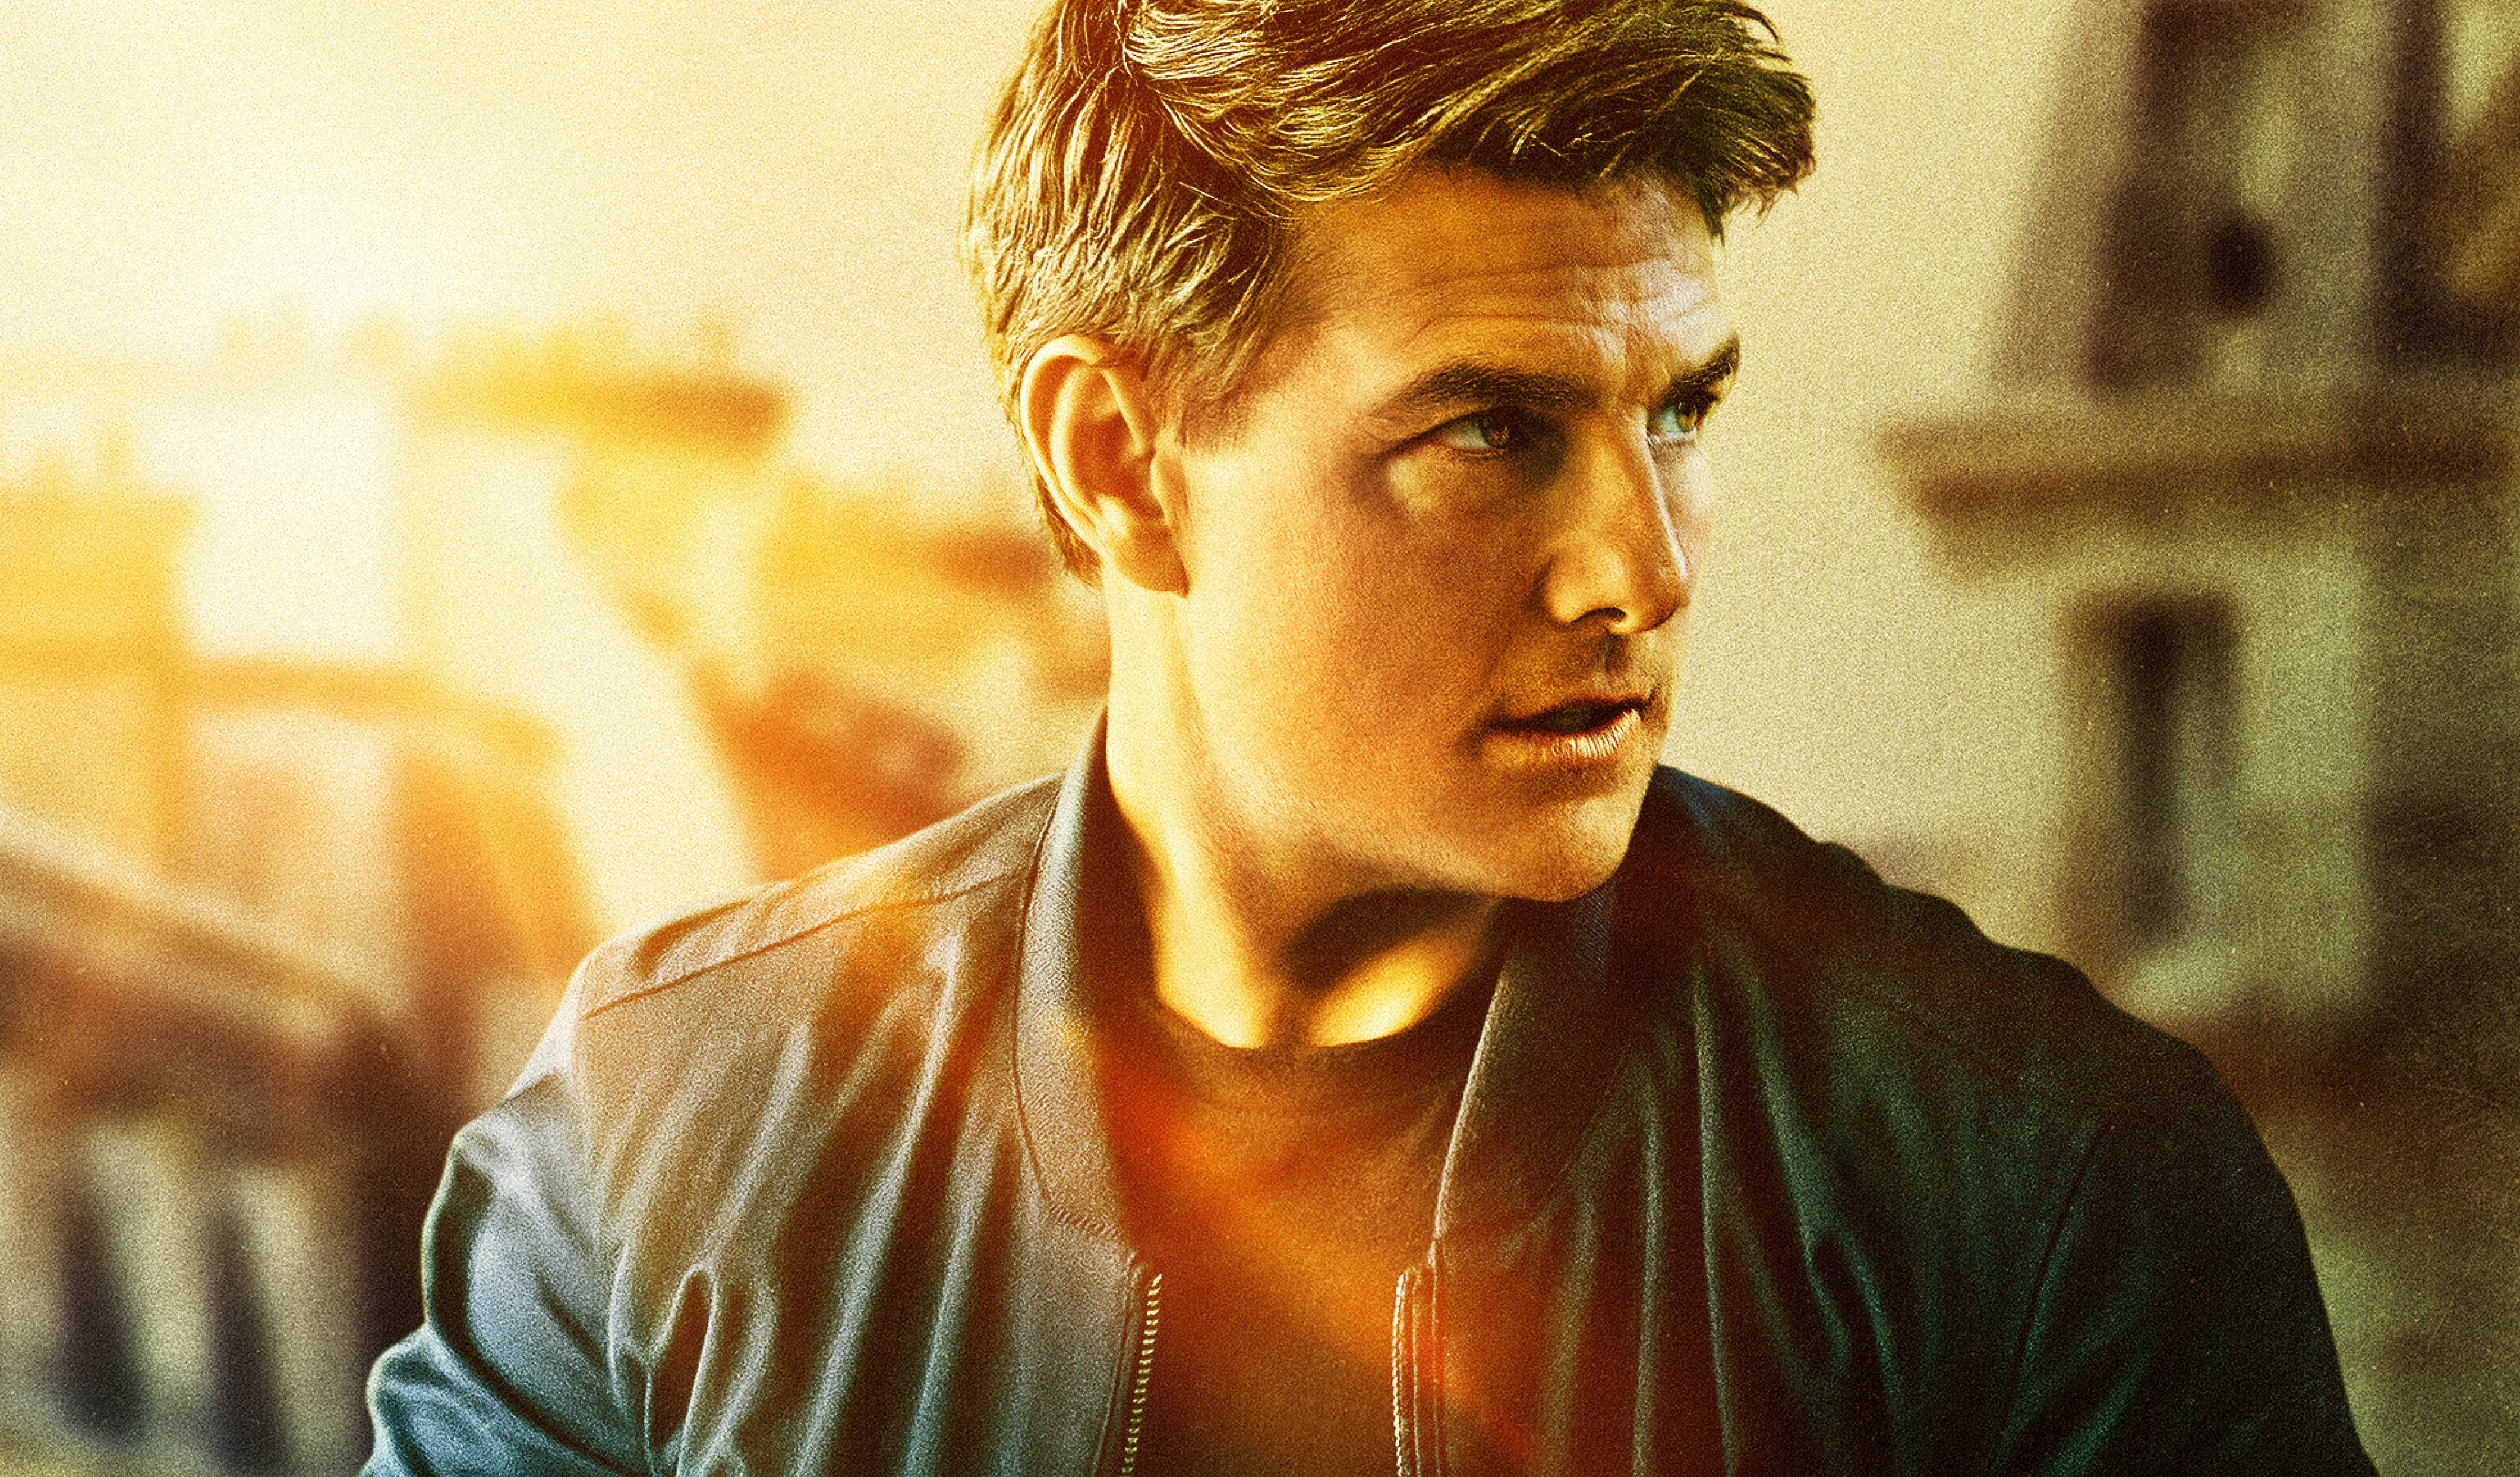 Tom Cruise From Mission Impossible Wallpaper HD